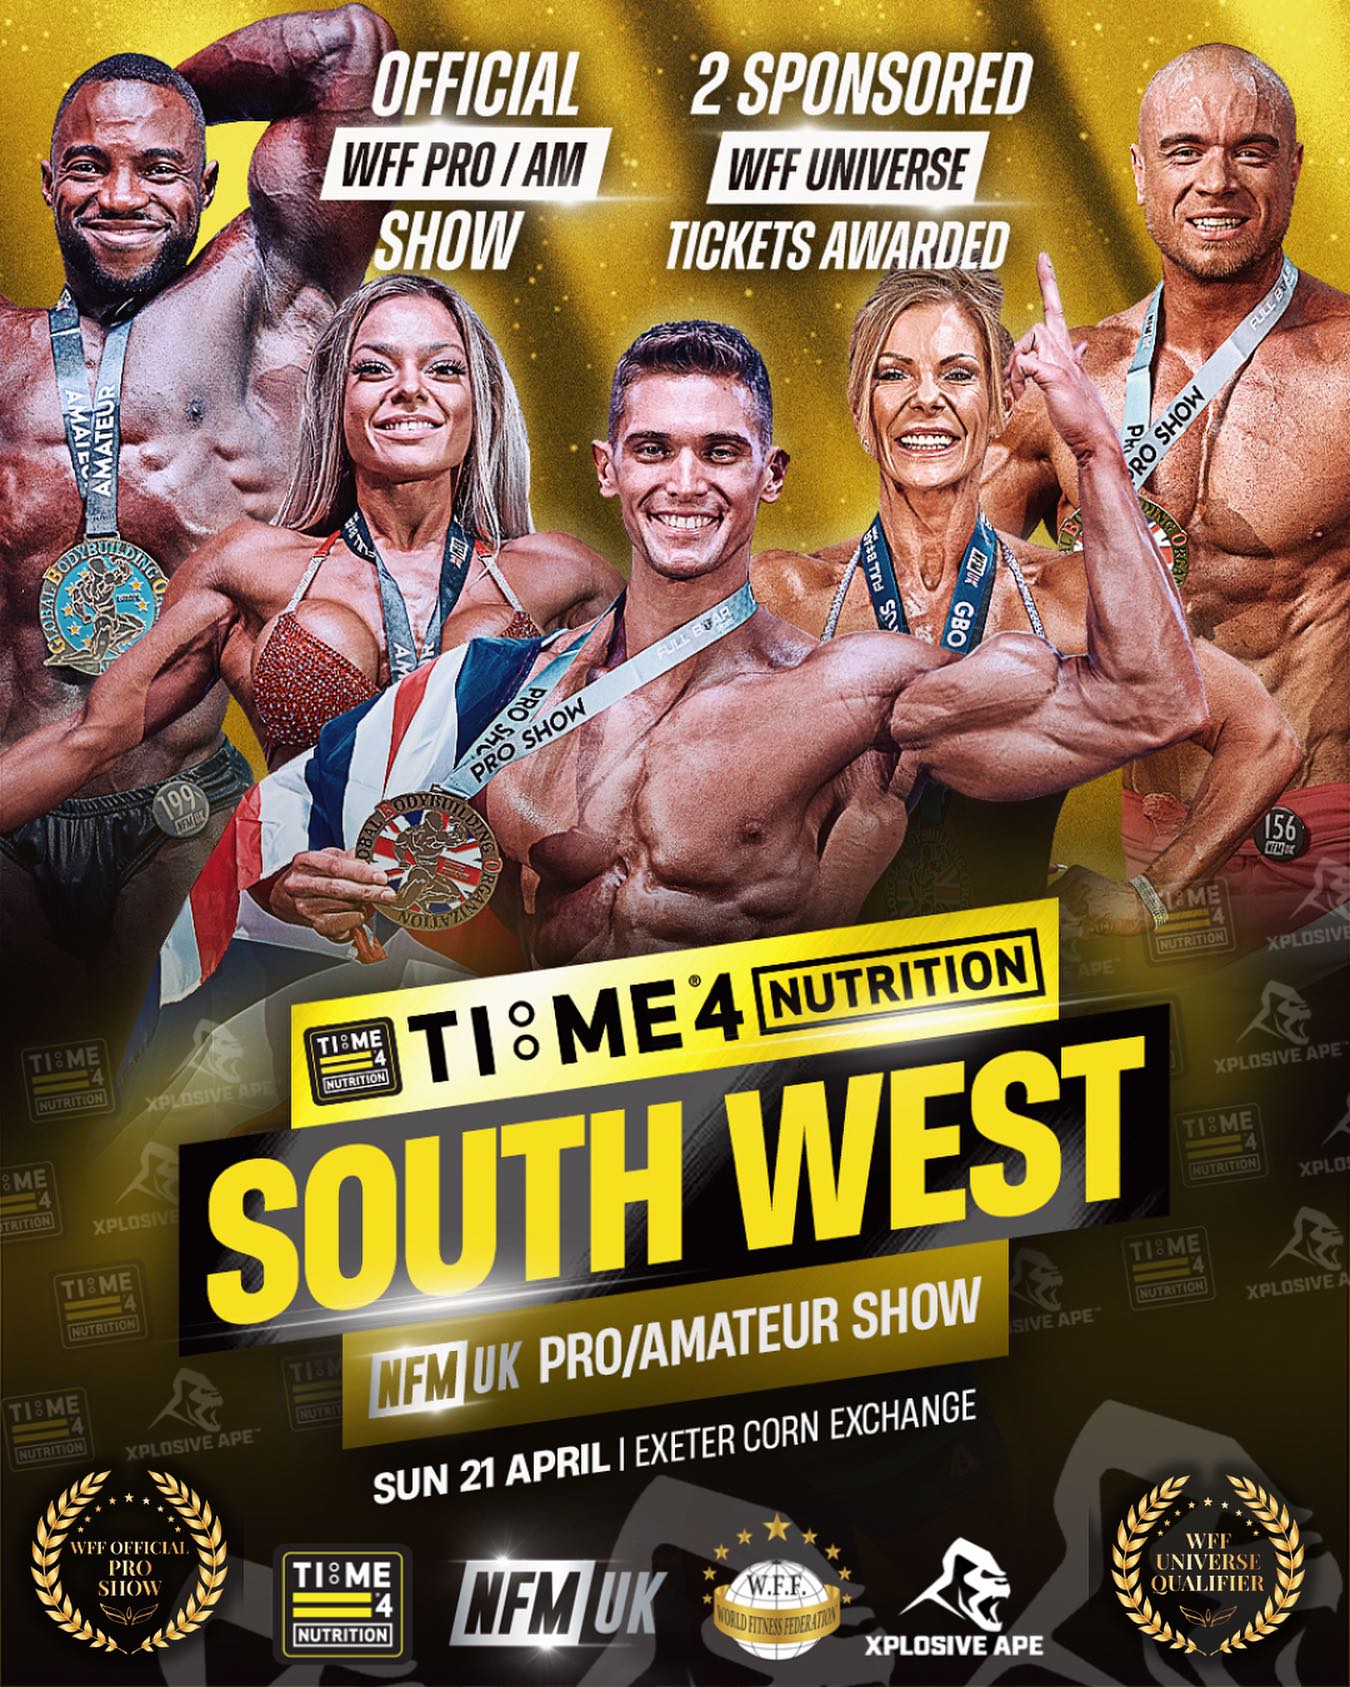 Nfmuk South West